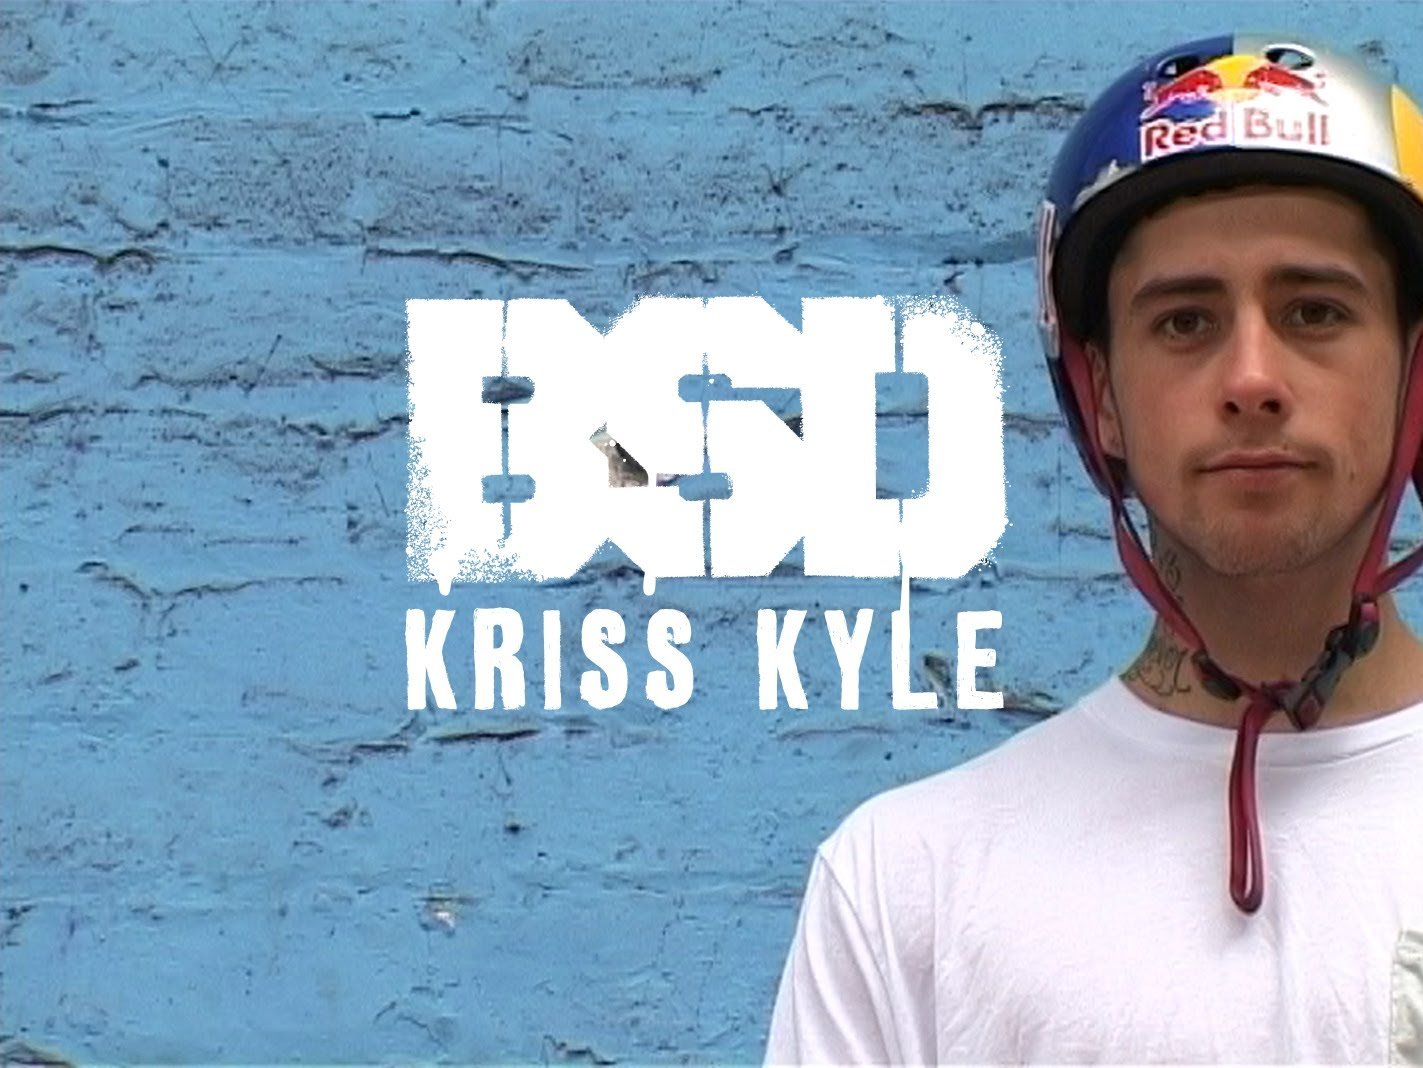 Kriss Kyle at home